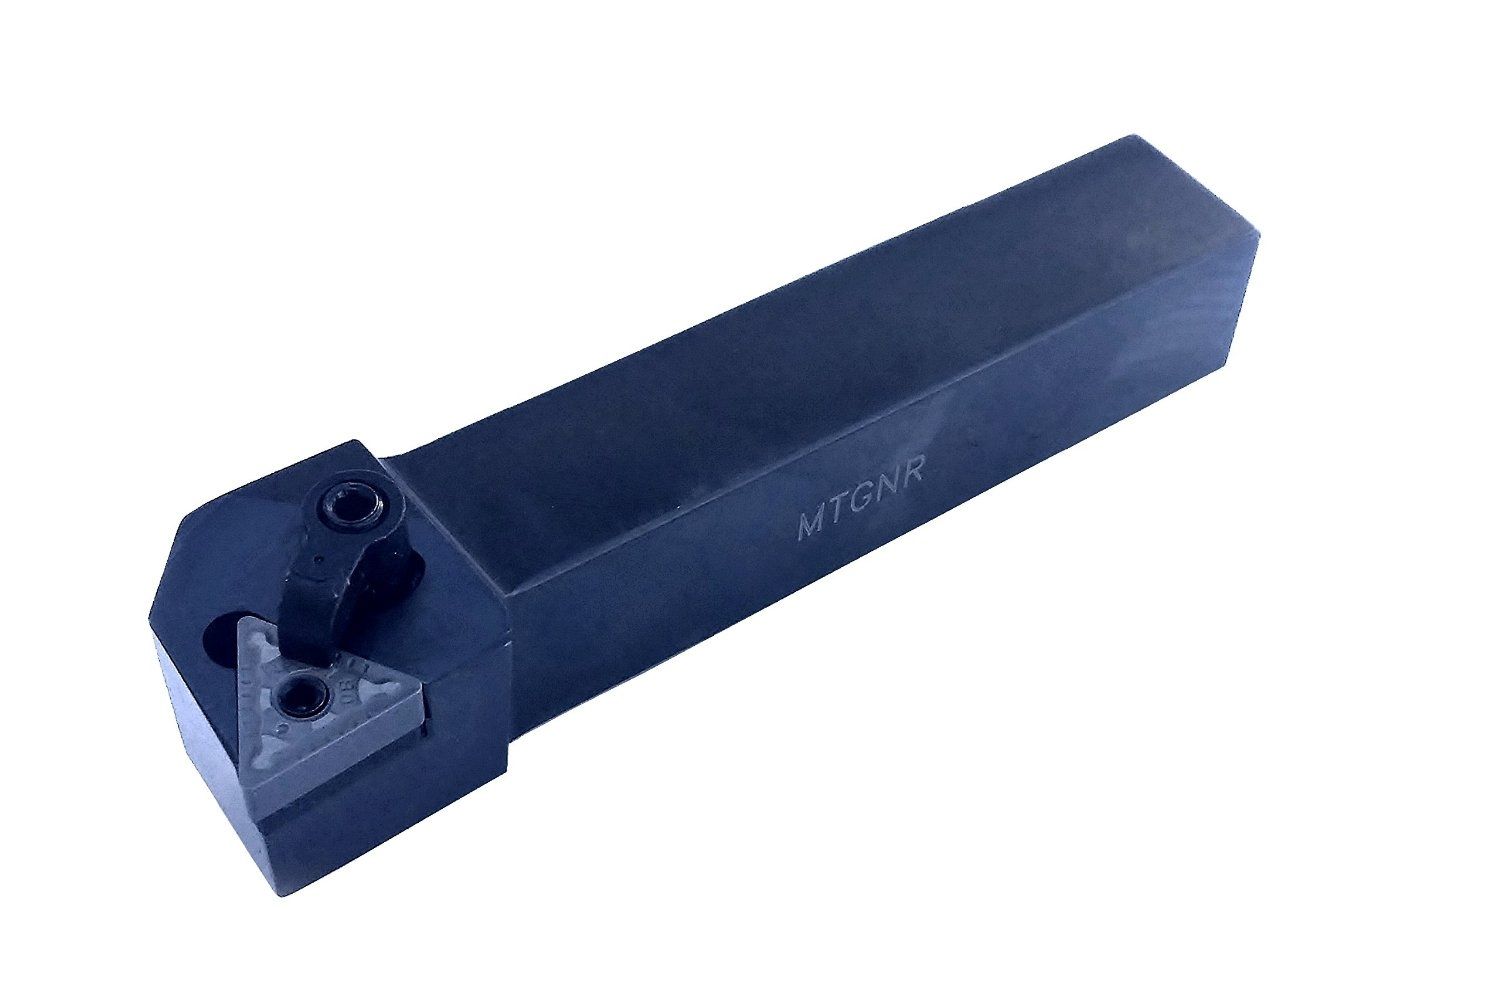 STYLE MTGNR 08-2A TURNING TOOL HOLDER (2013-1082)